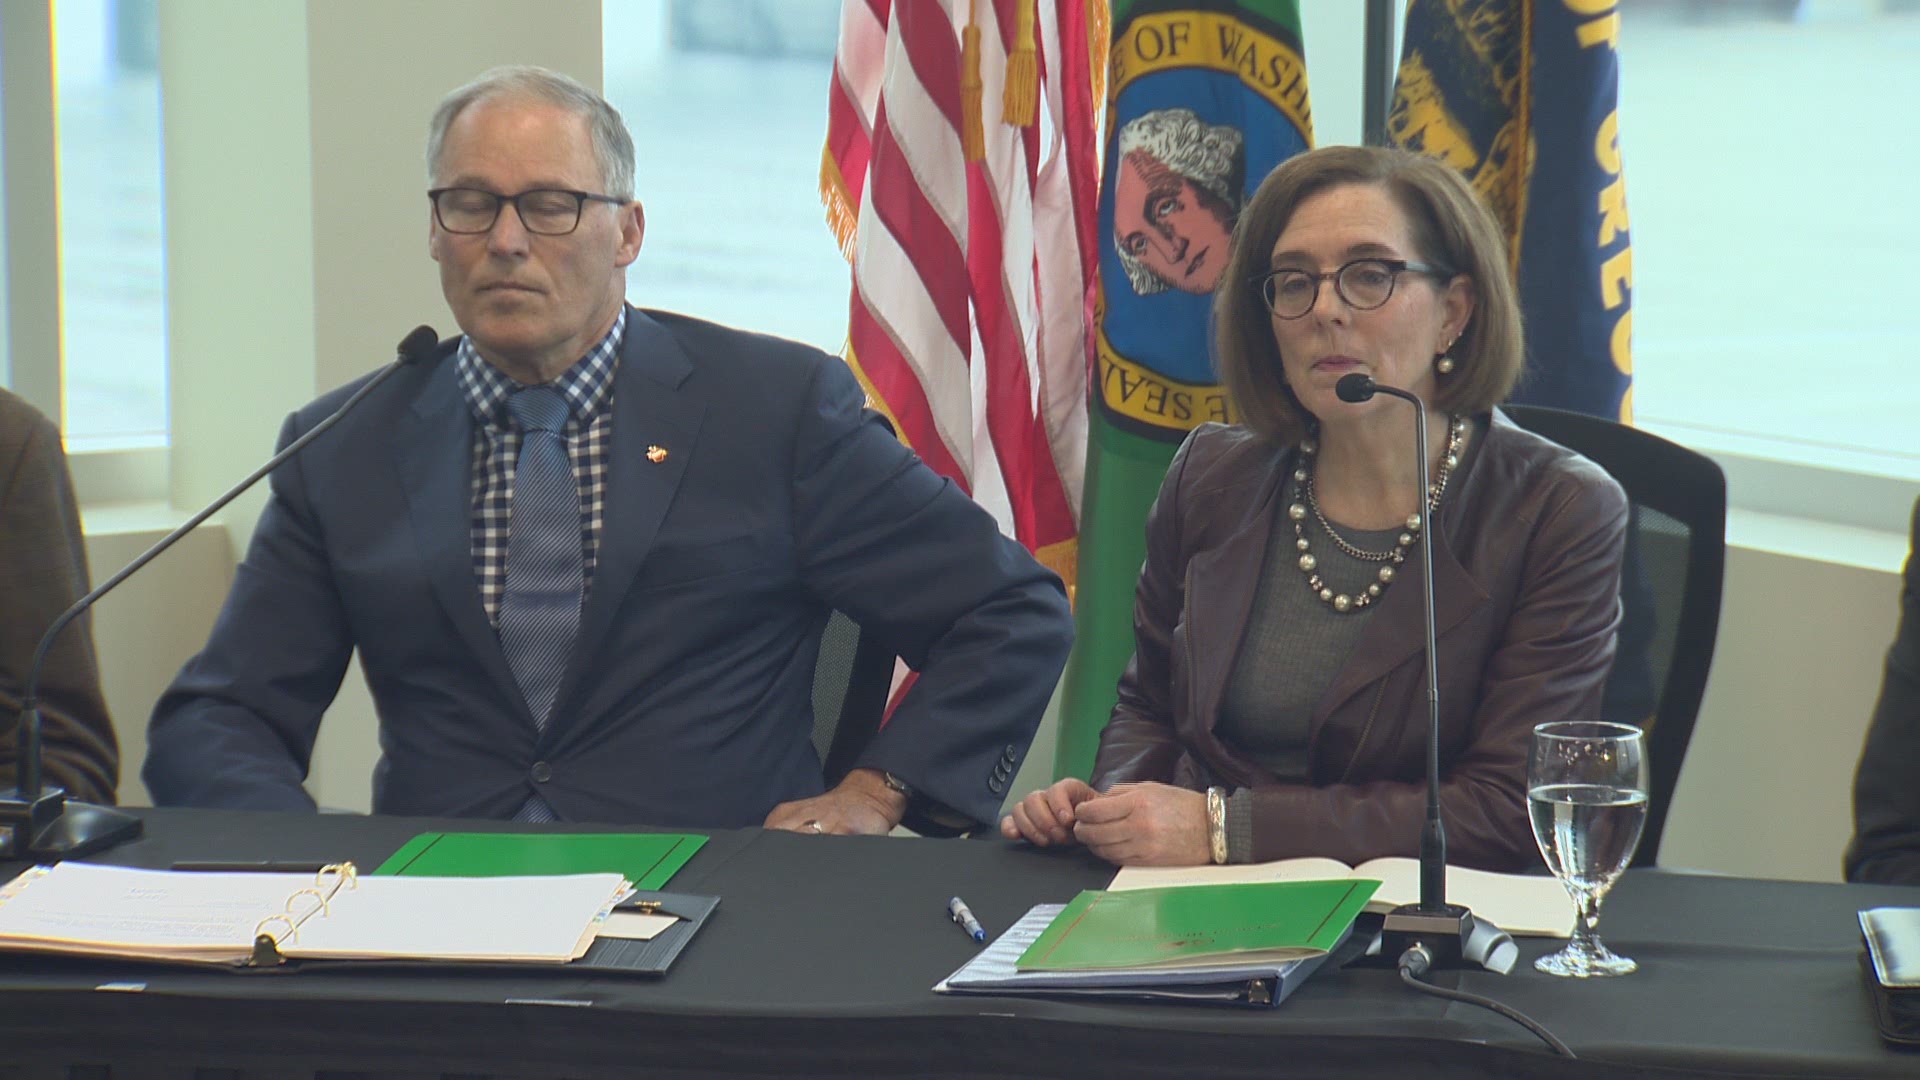 Oregon Gov. Kate Brown answers questions on the era of coal and the possibility of cap and trade returning to the Oregon Legislature.